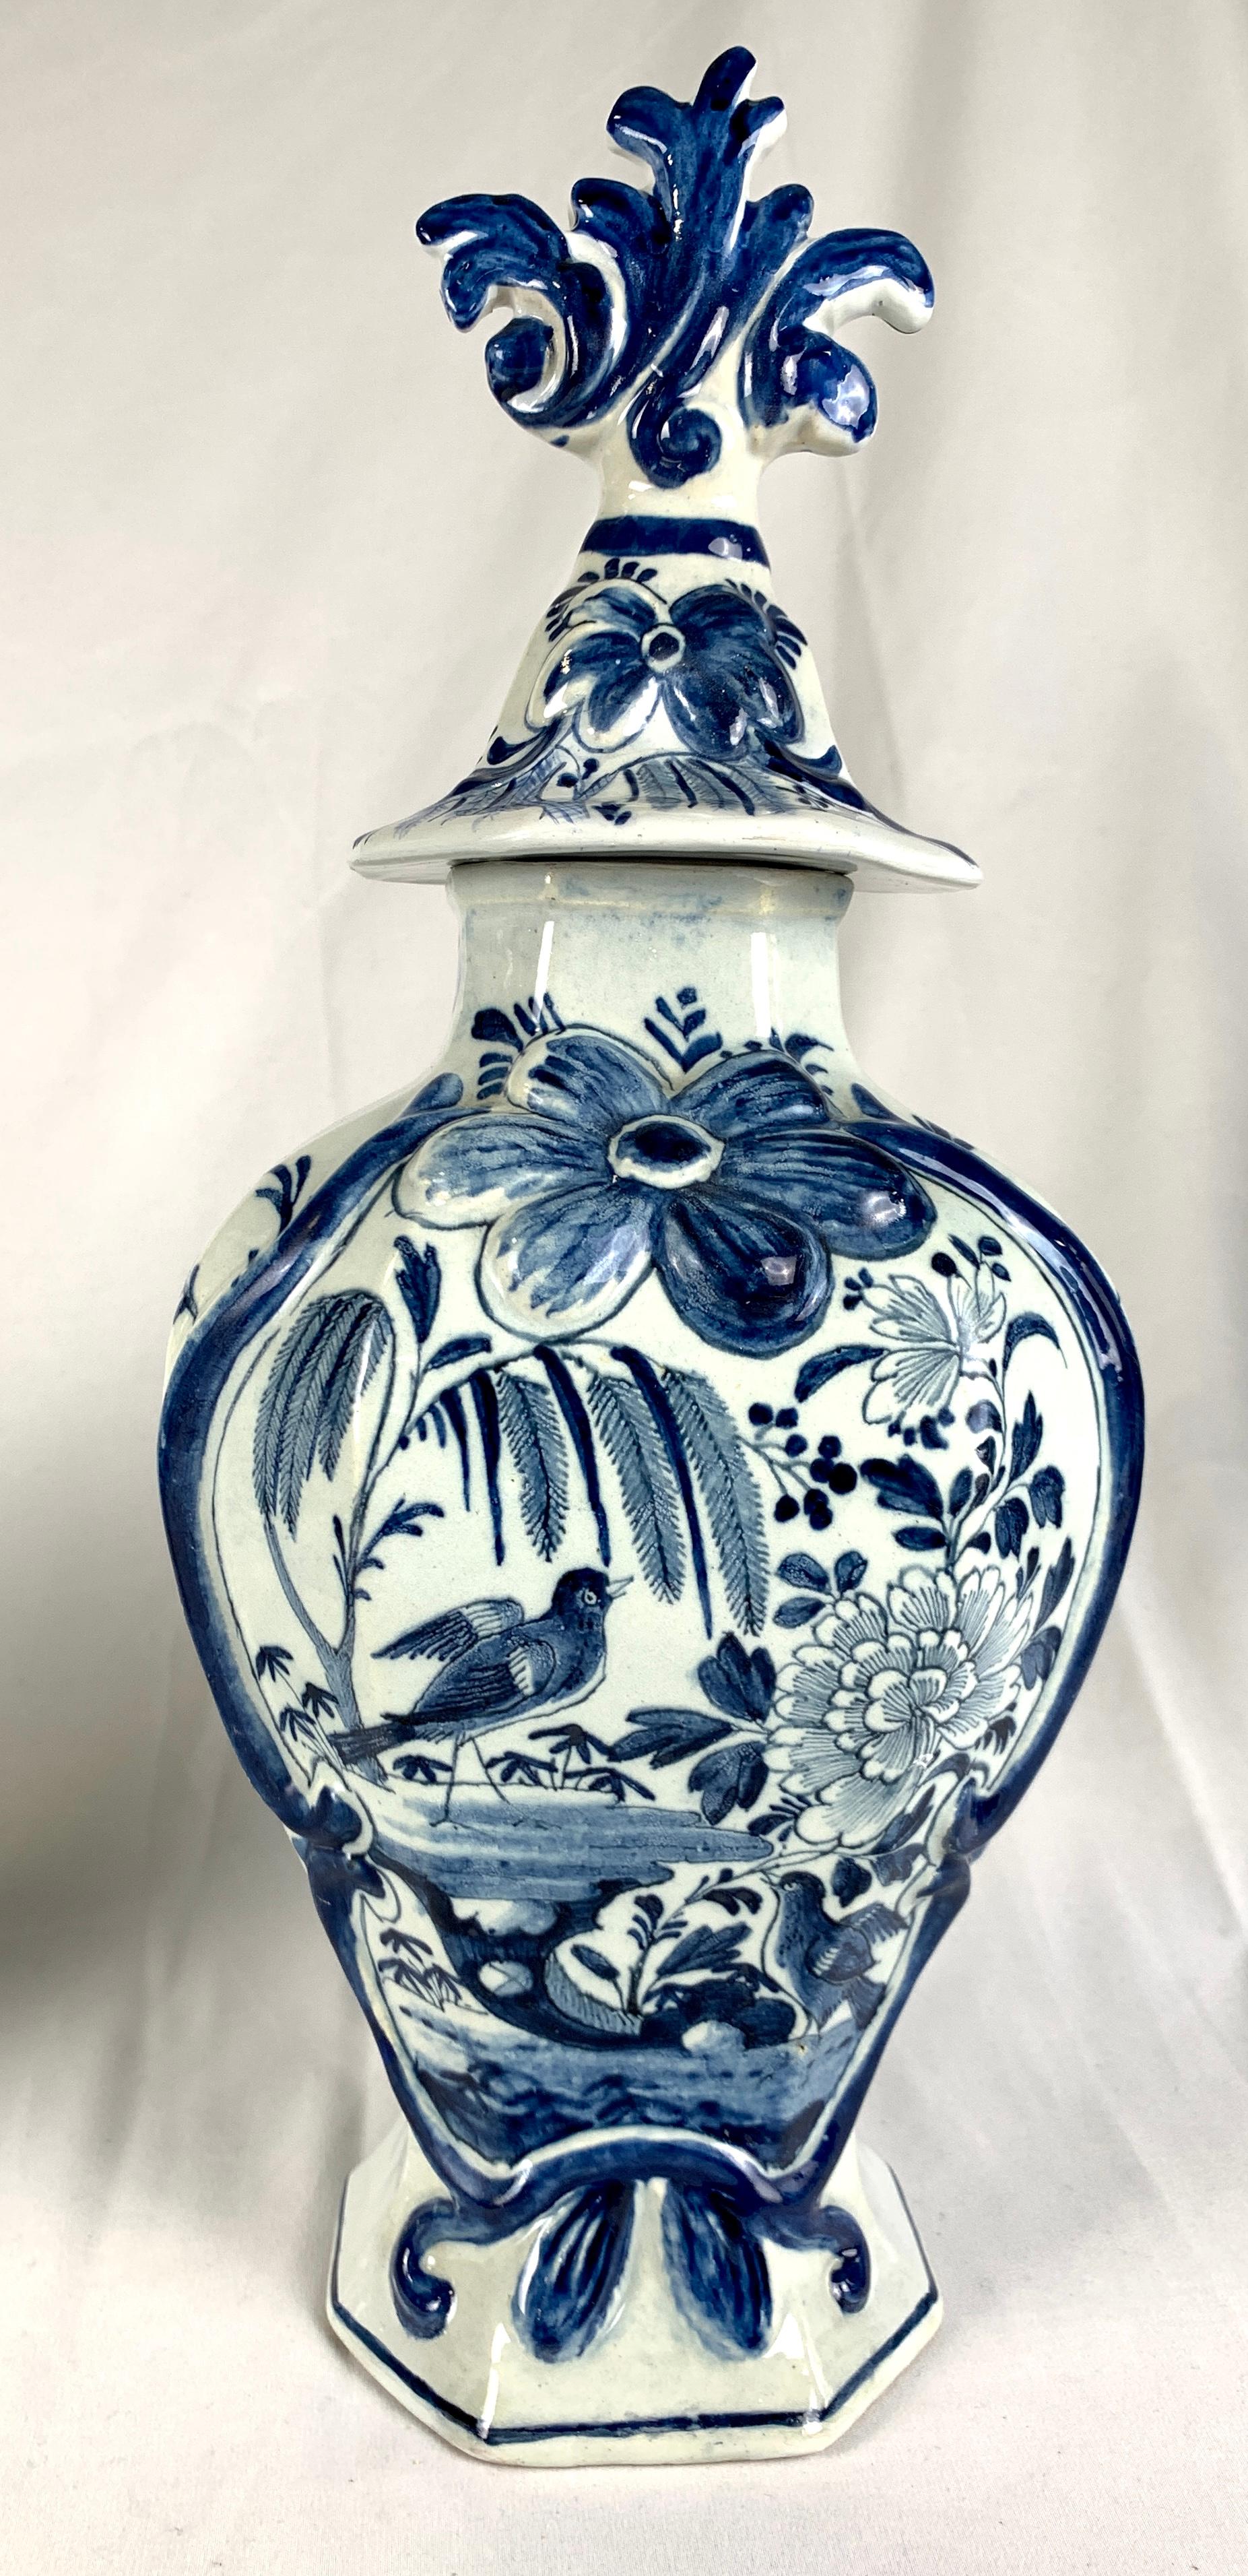 This pair of blue and white Delft mantle jars were hand painted at De Porceleyne Lampetkan factory circa 1770.
They are gorgeous! 
We see songbirds in a garden with a weeping willow tree and a large peony in full bloom.
The garden scene is framed